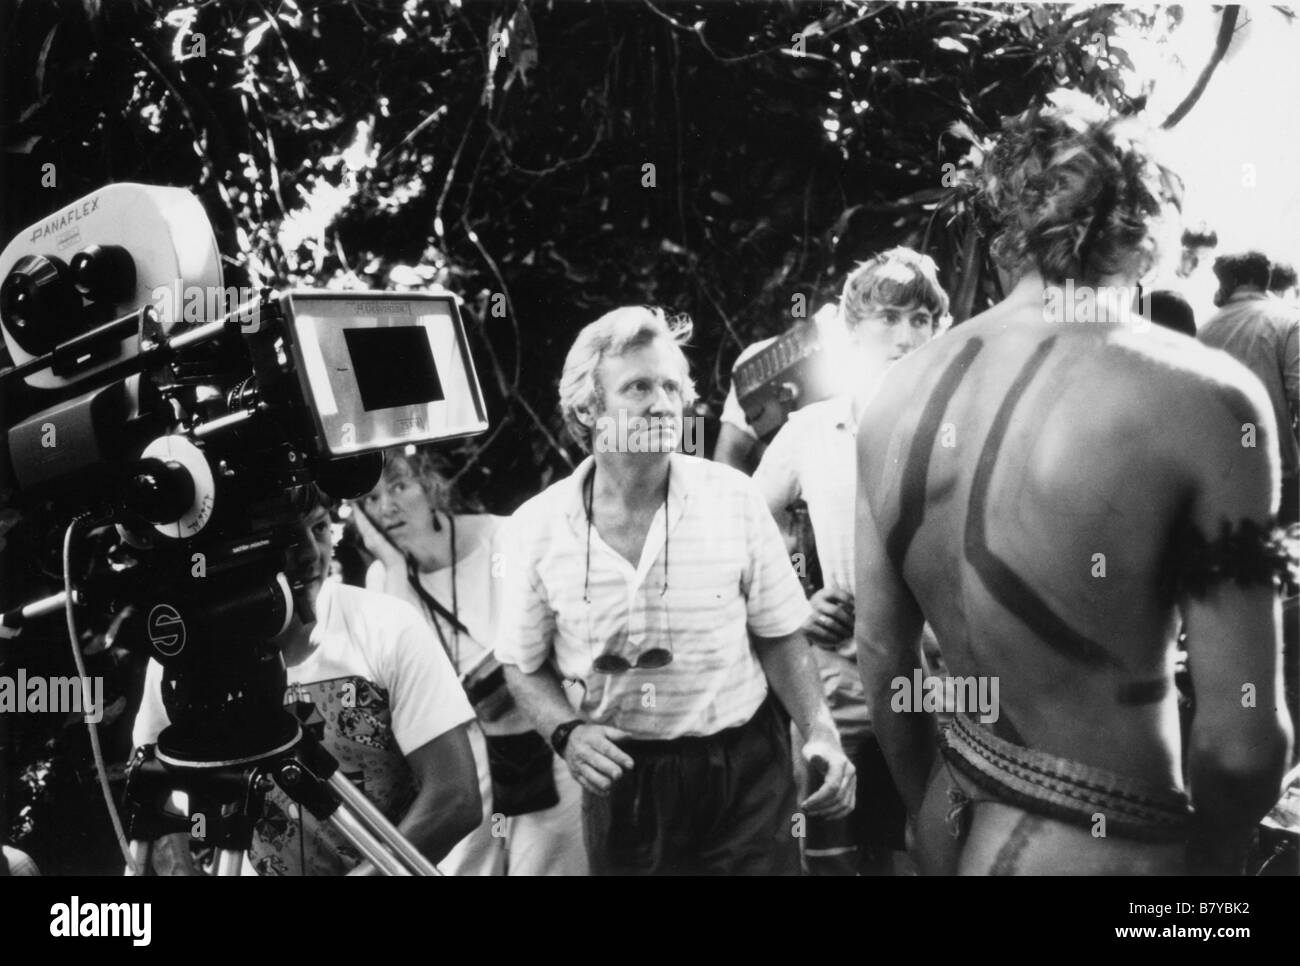 John Boorman John Boorman John Boorman sur le tournage on the set du film 'la forêt d'emeraude', 'The Emerald Forest'  Year: 1985 - uk  Director: John Boorman Stock Photo